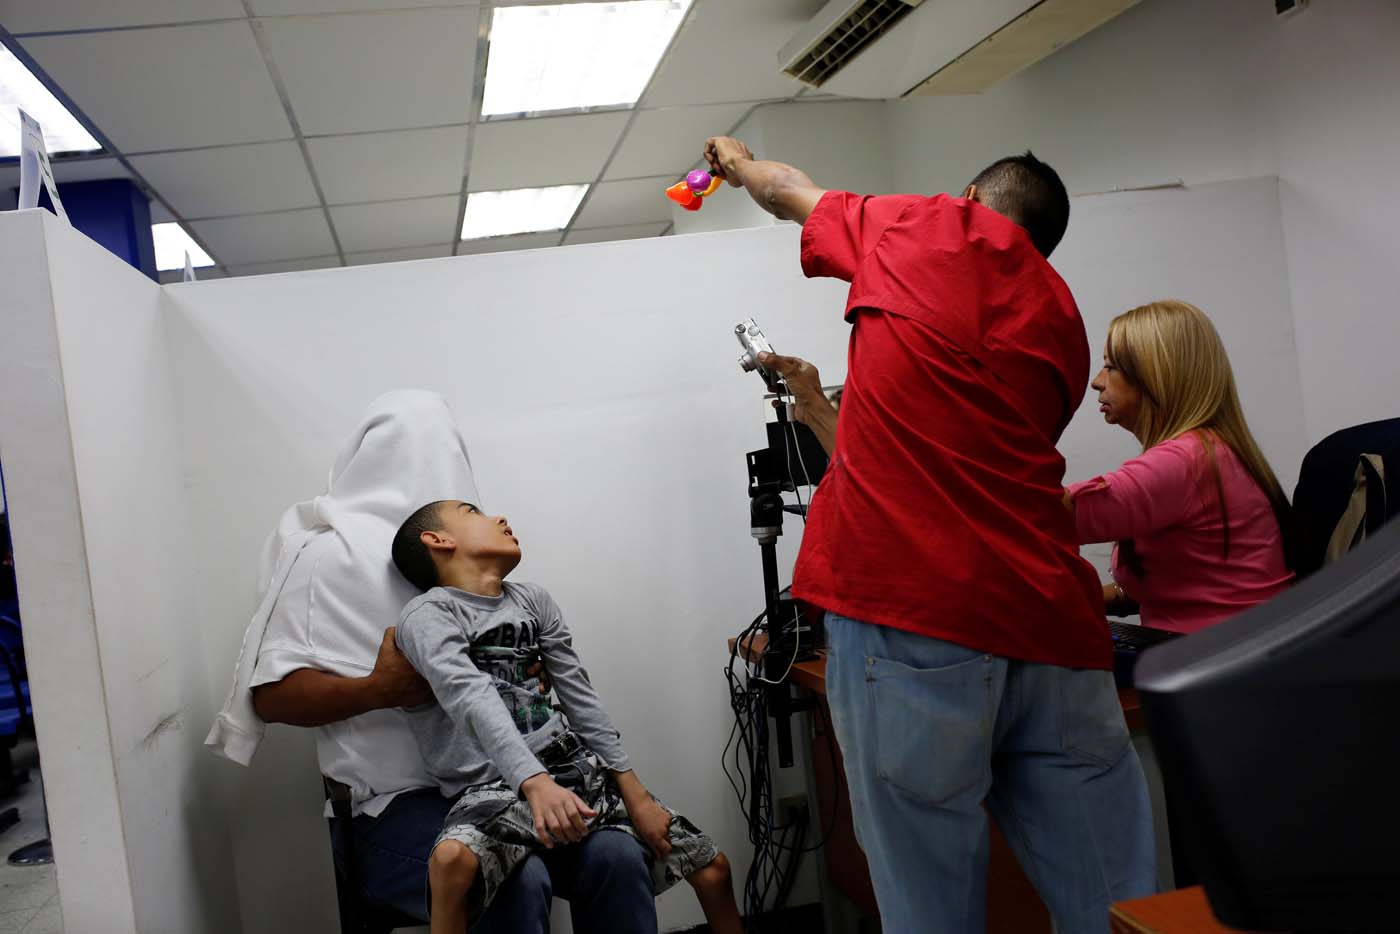 Miguel Anton (L covered) holds his son, Jose Gregorio Anton, 11, a neurological patient being treated with anticonvulsants, while workers takes a picture to him for his ID in La Guaira, Venezuela February 20, 2017. REUTERS/Carlos Garcia Rawlins    SEARCH "EPILEPSY CARACAS" FOR THIS STORY. SEARCH "WIDER IMAGE" FOR ALL STORIES.